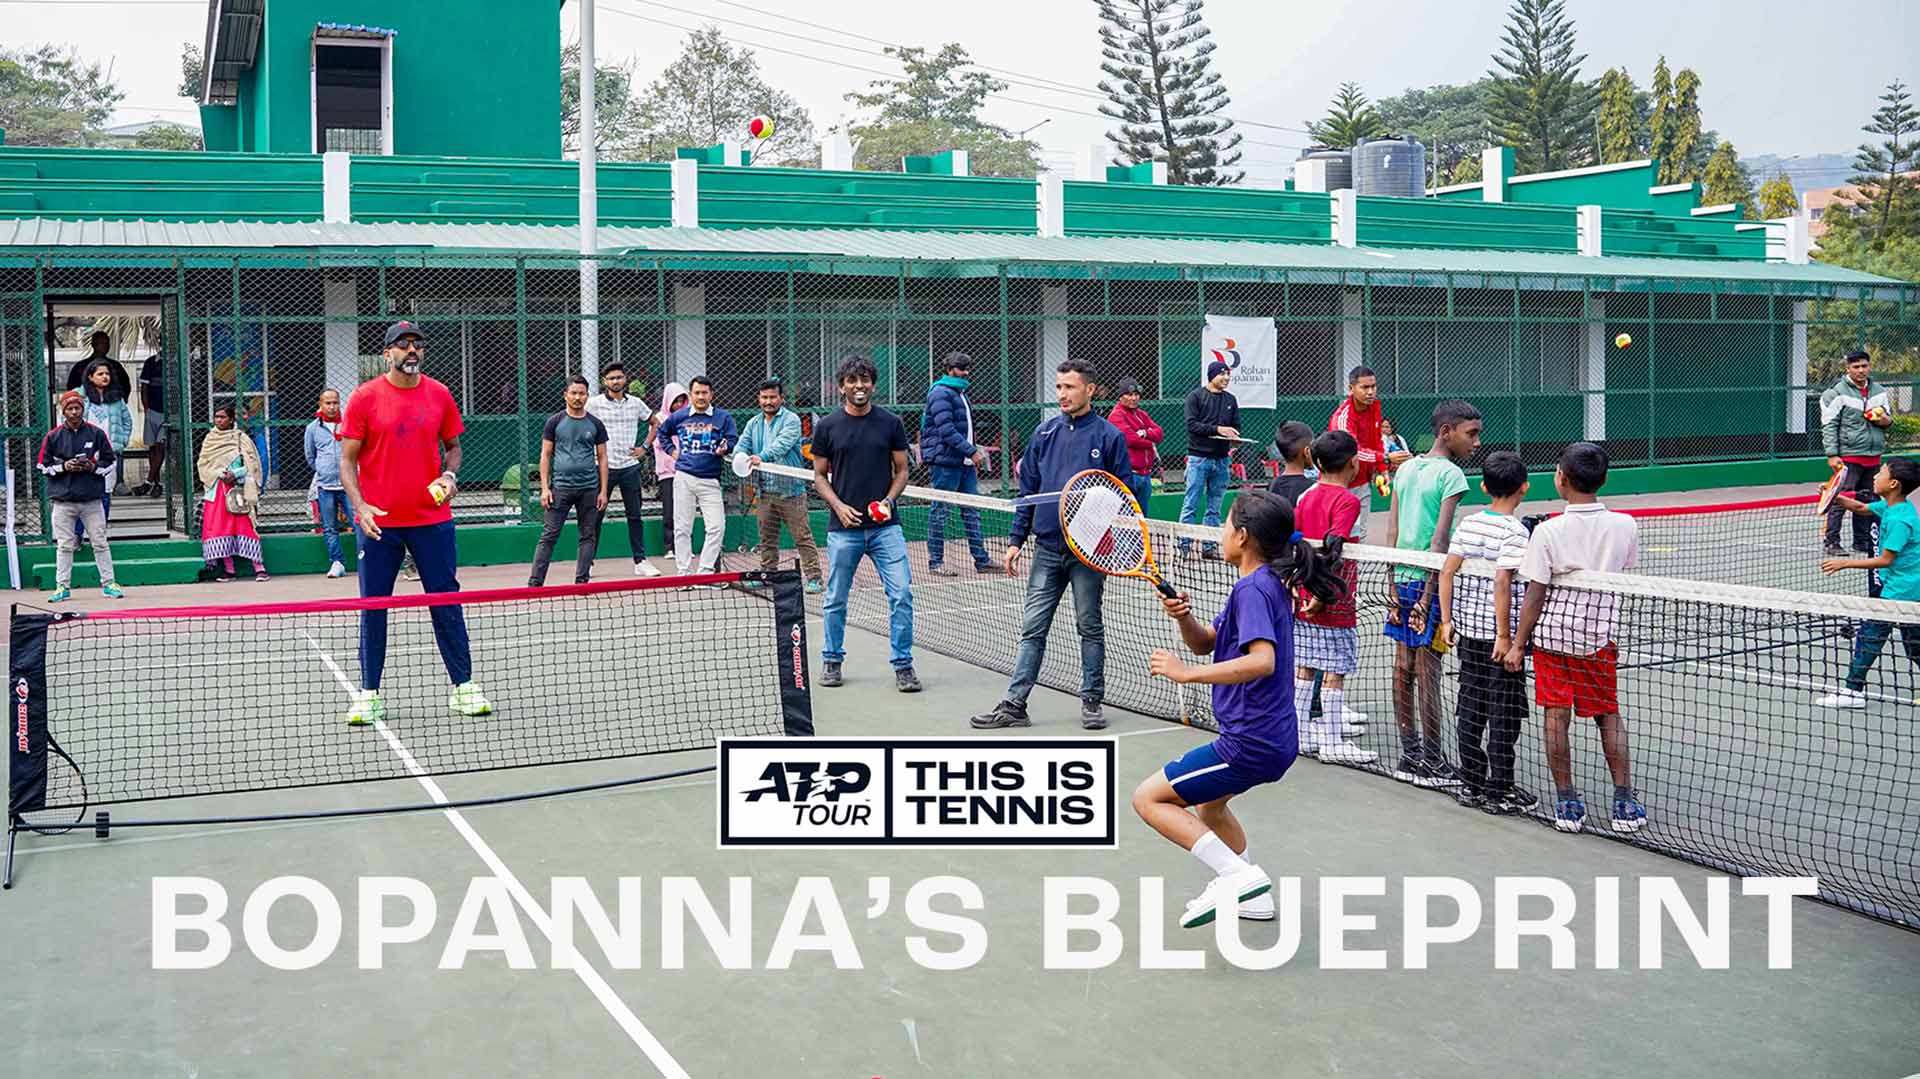 Bopanna’s Blueprint: Providing opportunities for India’s underprivileged youth